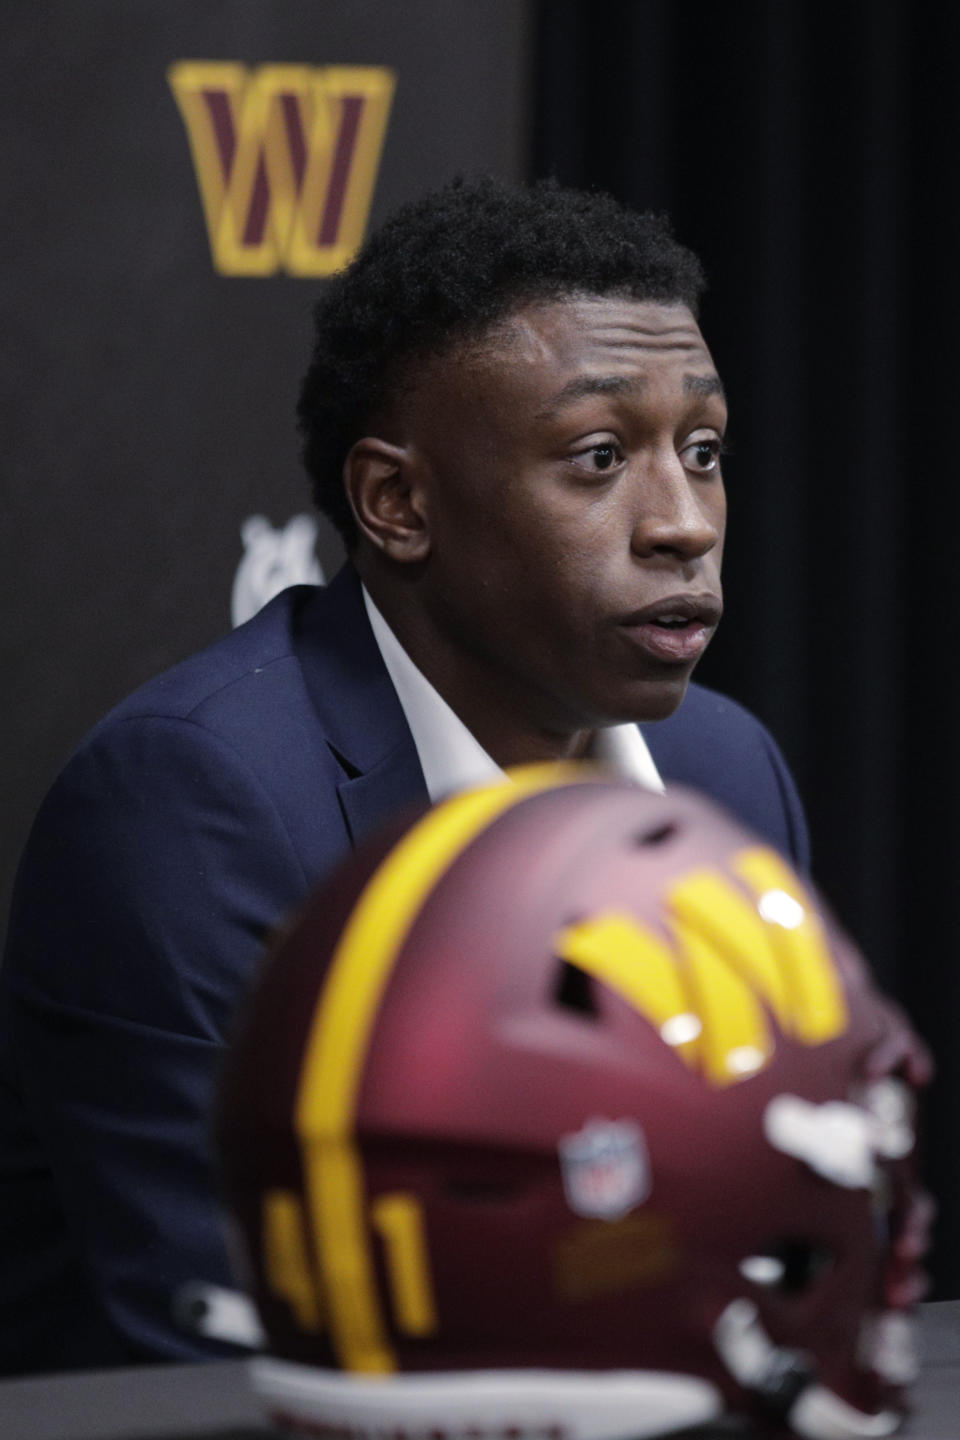 The Washington Commanders' first-round draft pick, Mississippi State cornerback Emmanuel Forbes, speaks during a news conference at the NFL football team's training facility in Ashburn, Va., Friday, April 28, 2023. (AP Photo/Luis M. Alvarez)